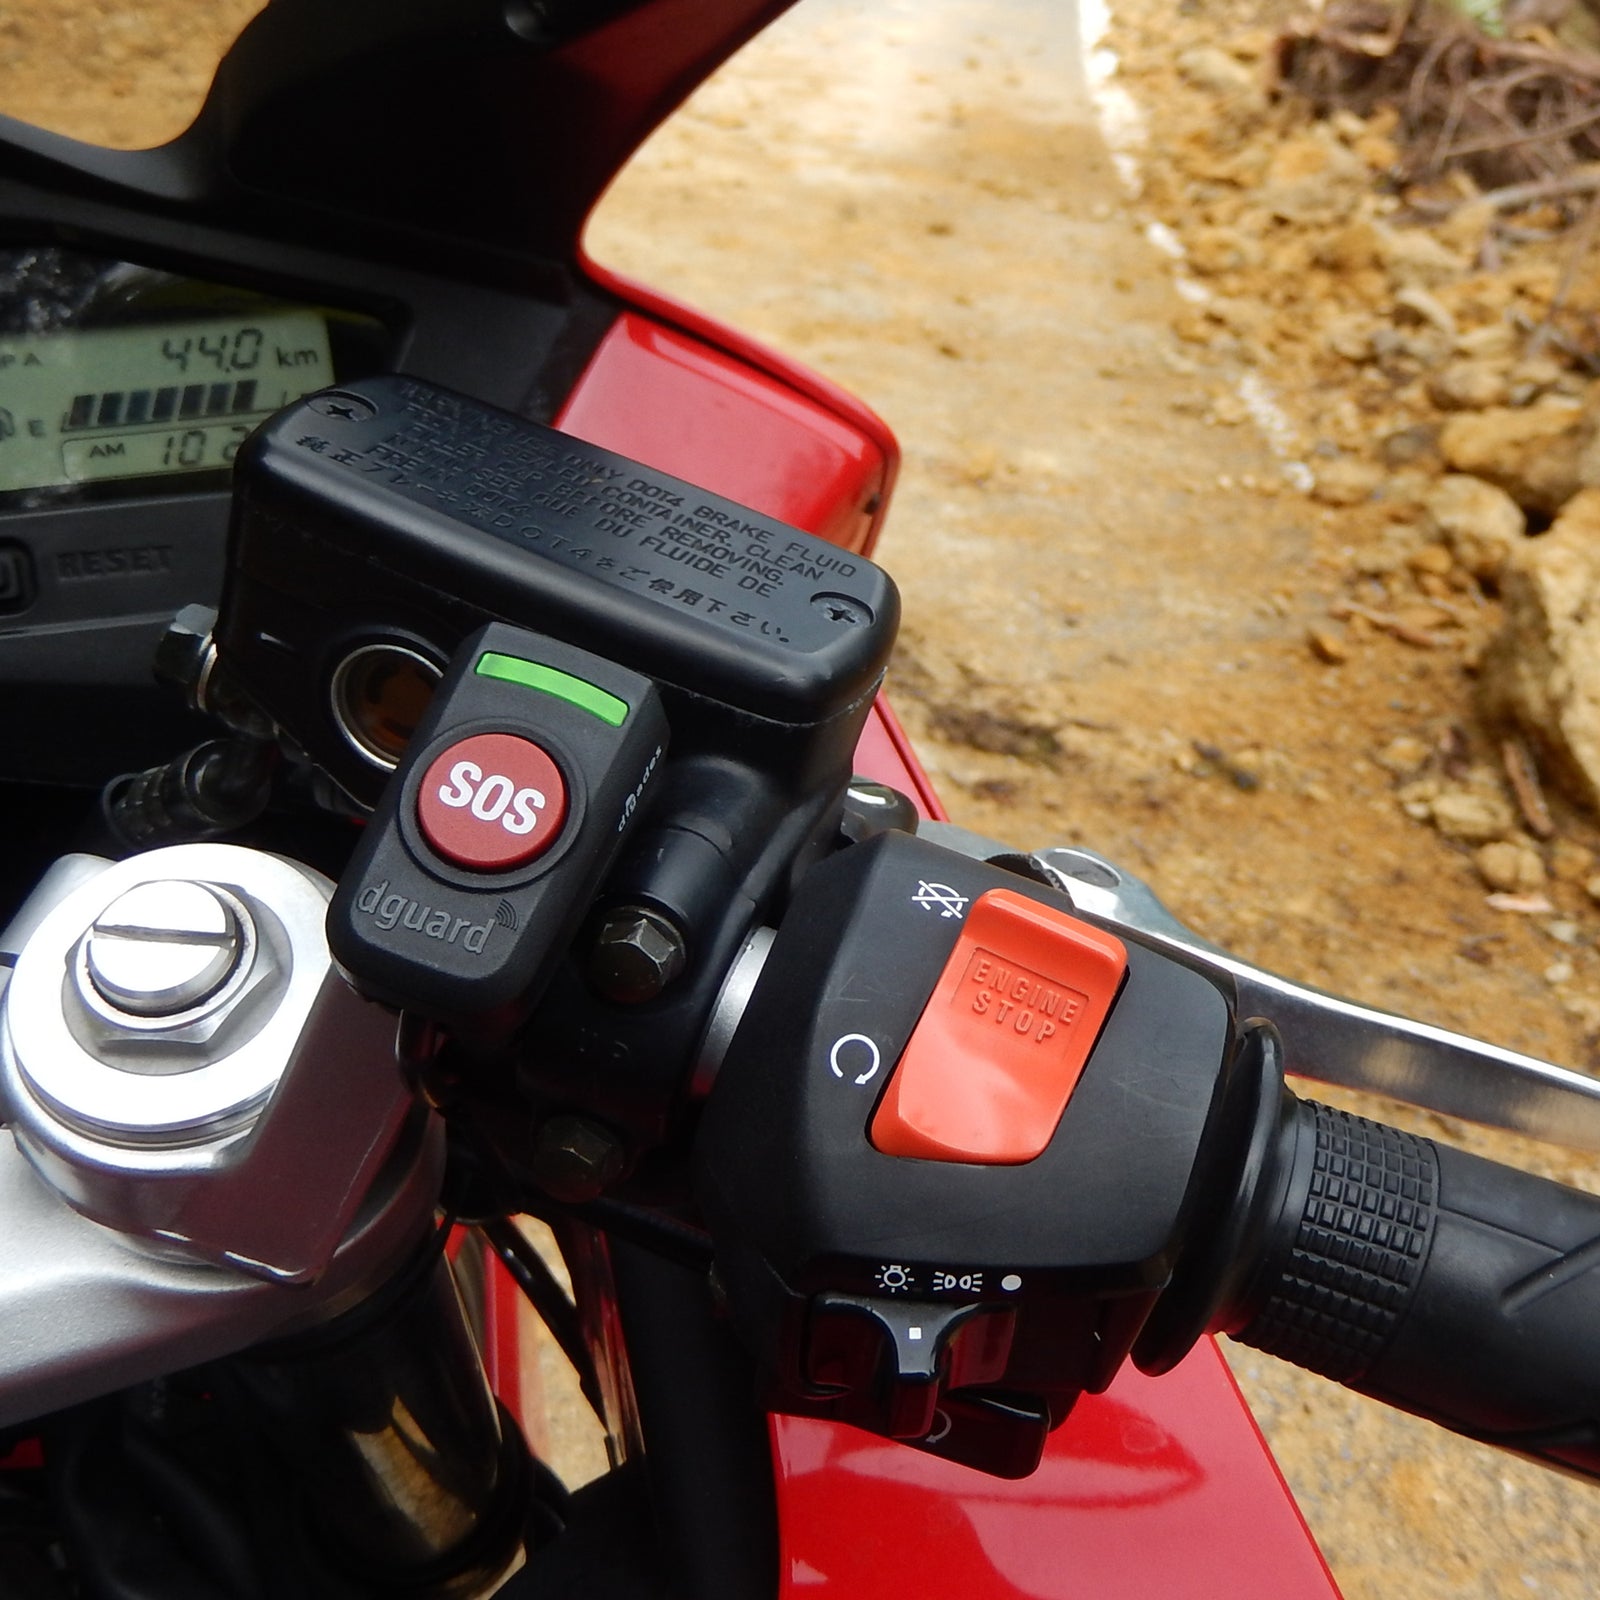 The dguard button is attached to the handlebars of a motorcycle and, with a weight of just 45g, does not restrict the motorcyclist.